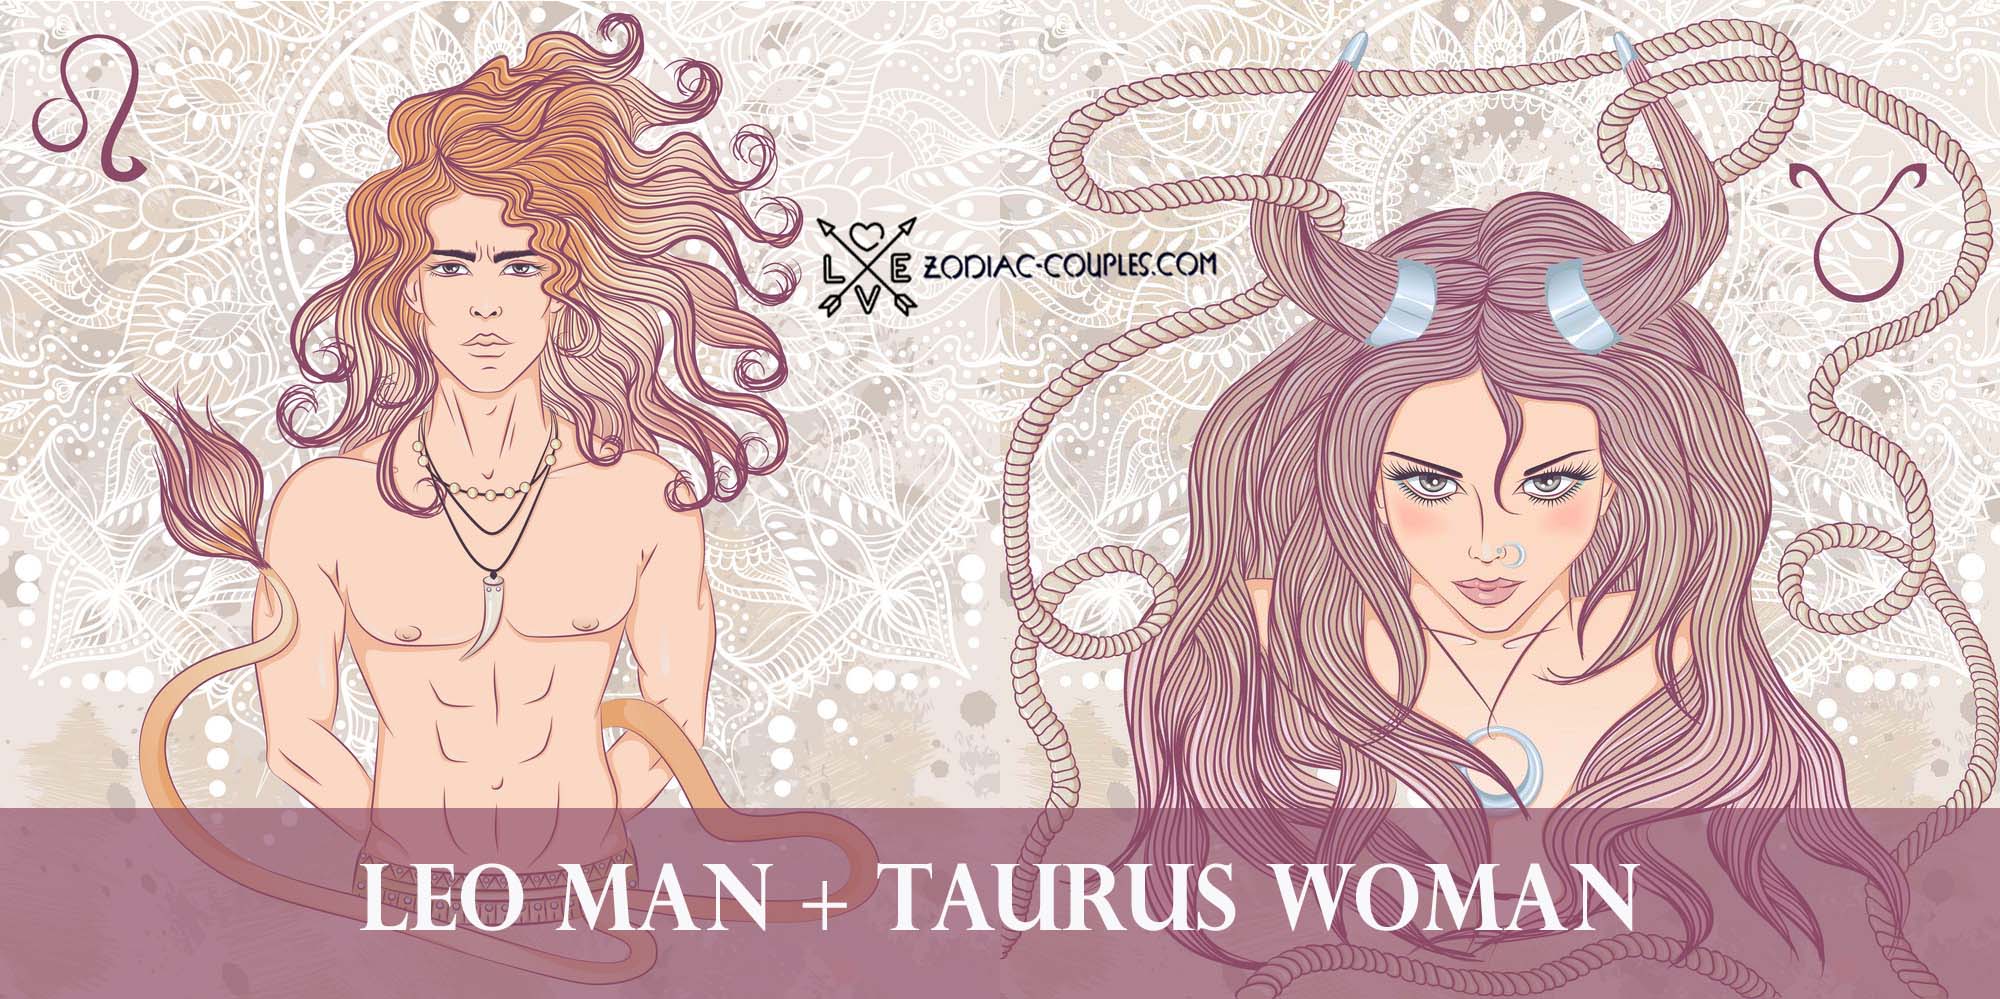 Leo man + Taurus woman Famous Couples and Compatibility ♌♉ Zodiac Couples